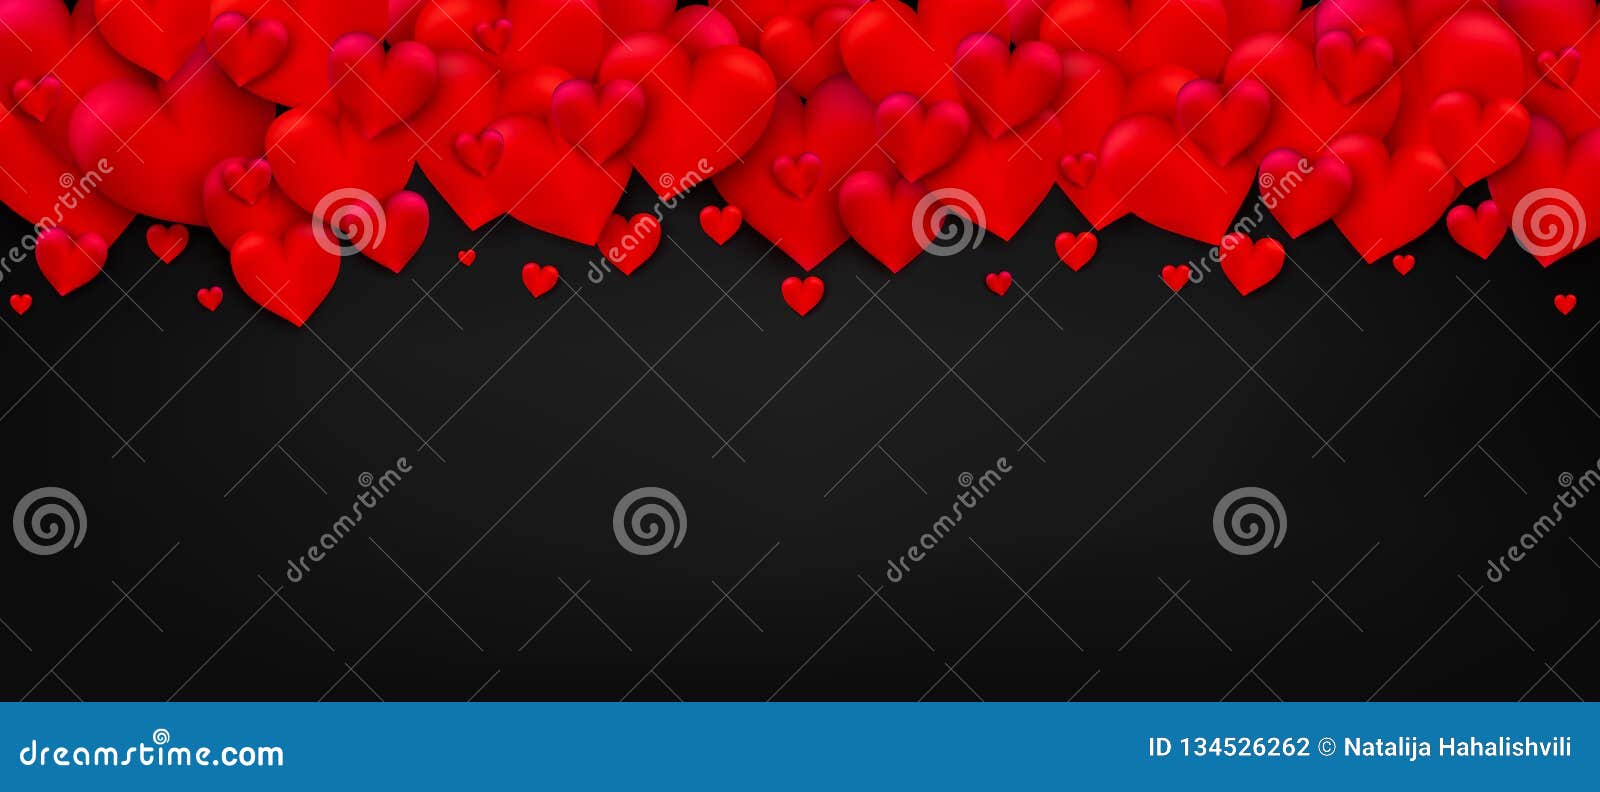 Valentines Day Background With 3d Realistic Red Hearts On Black